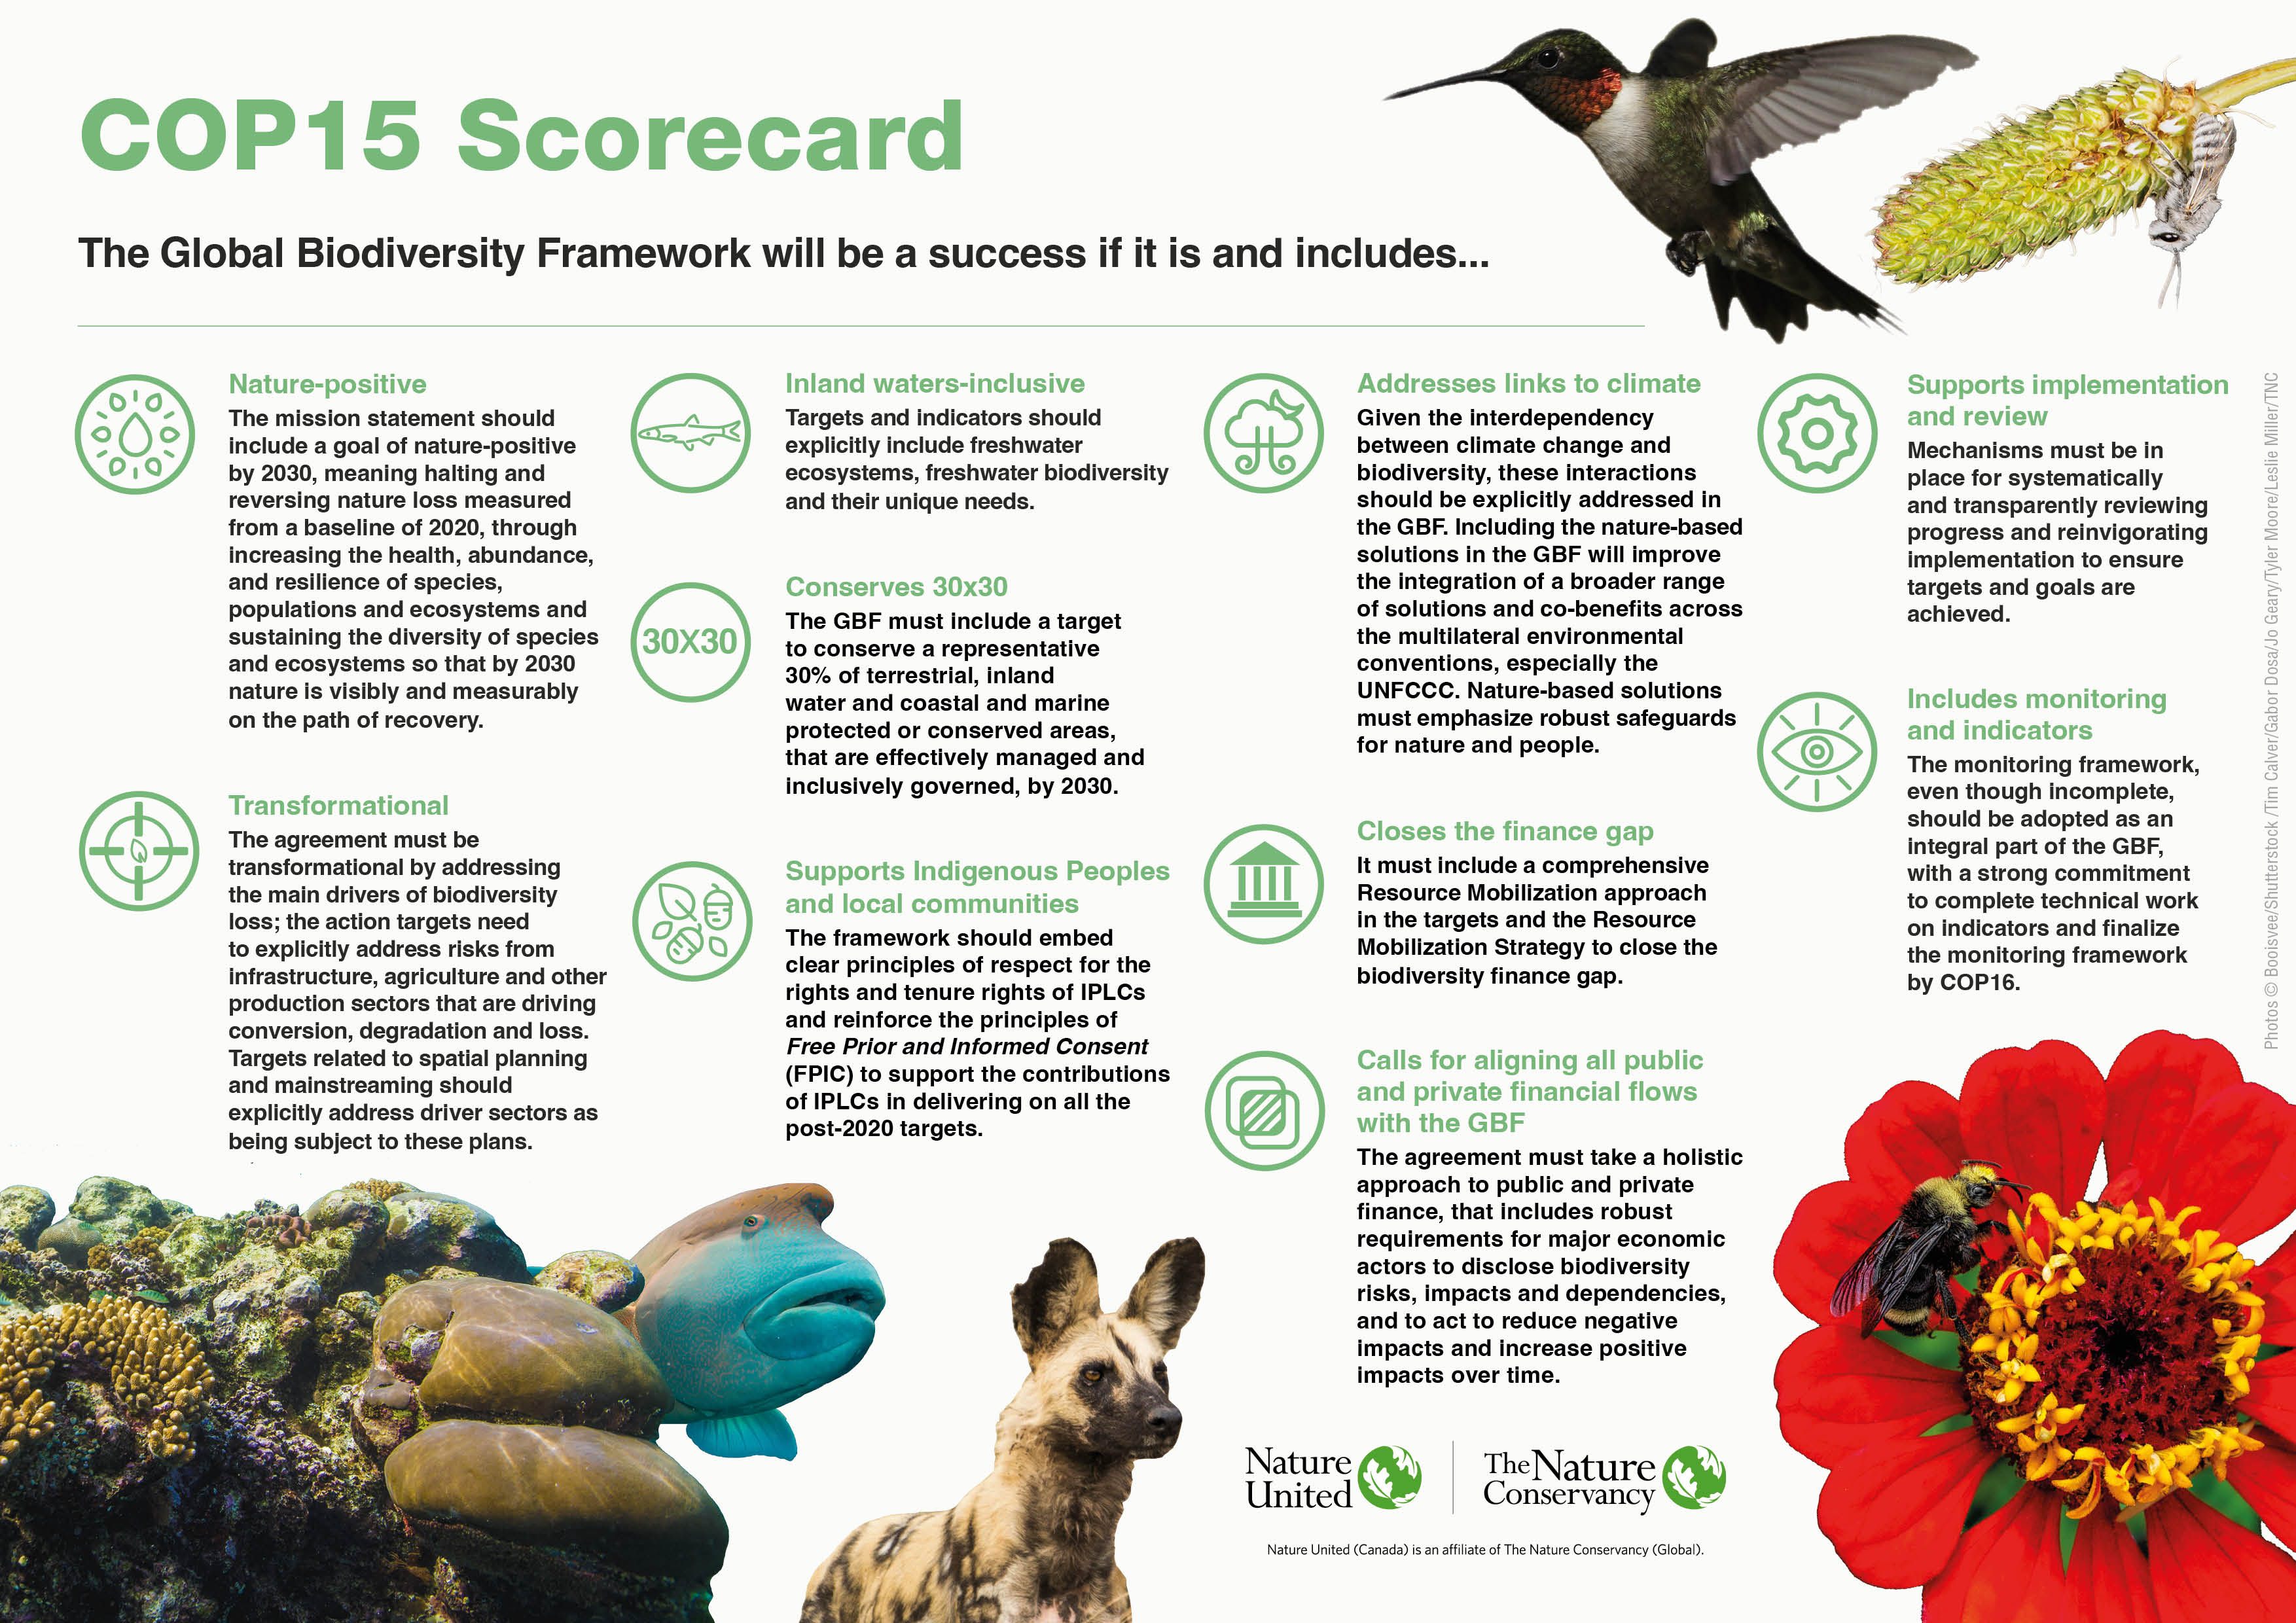 Scorecard with 10 points and pictures of animals.